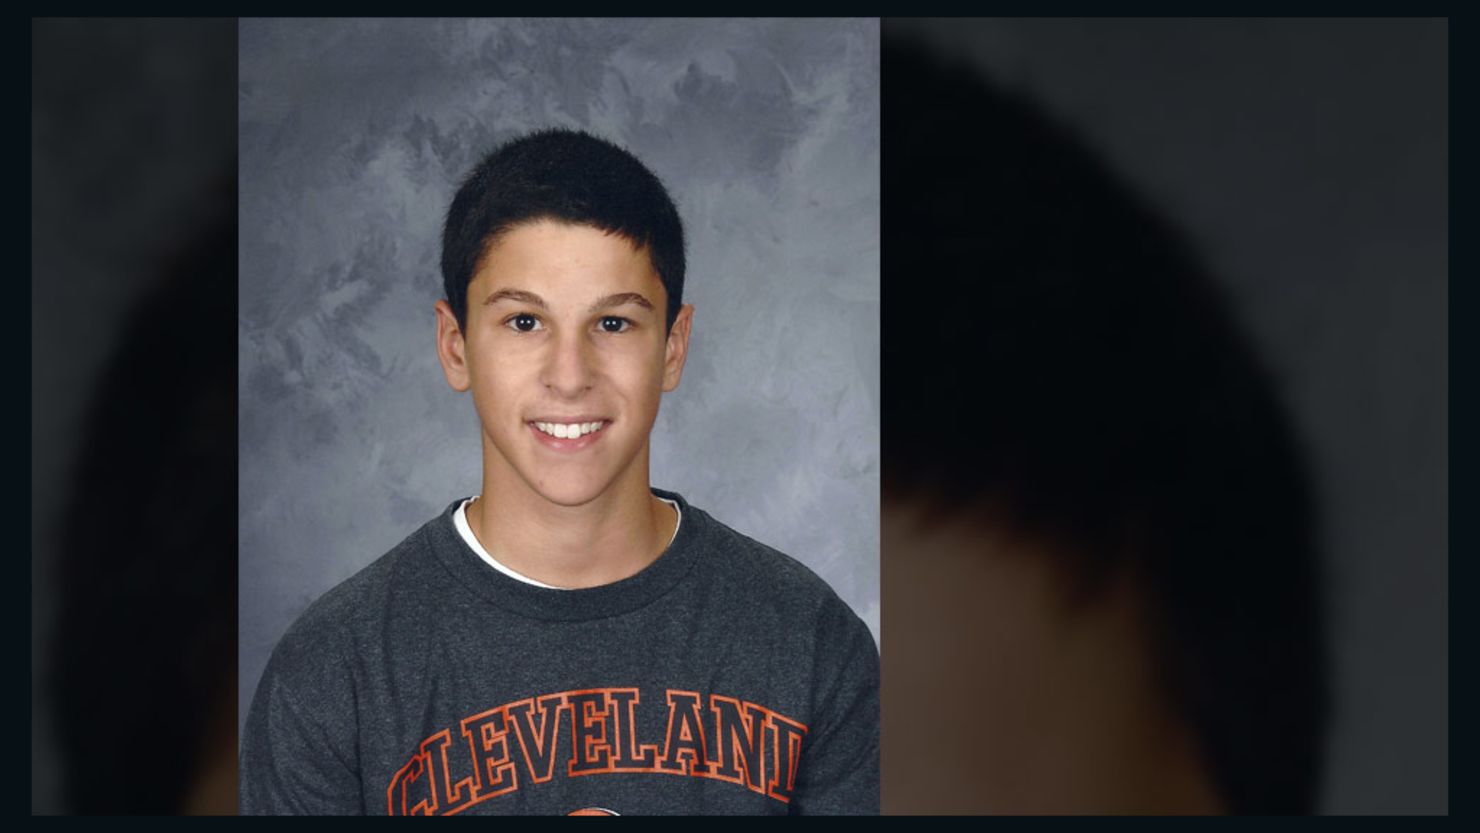 Daniel Parmertor, 16, one of the shooting victims, had recently found a job at a bowling alley.